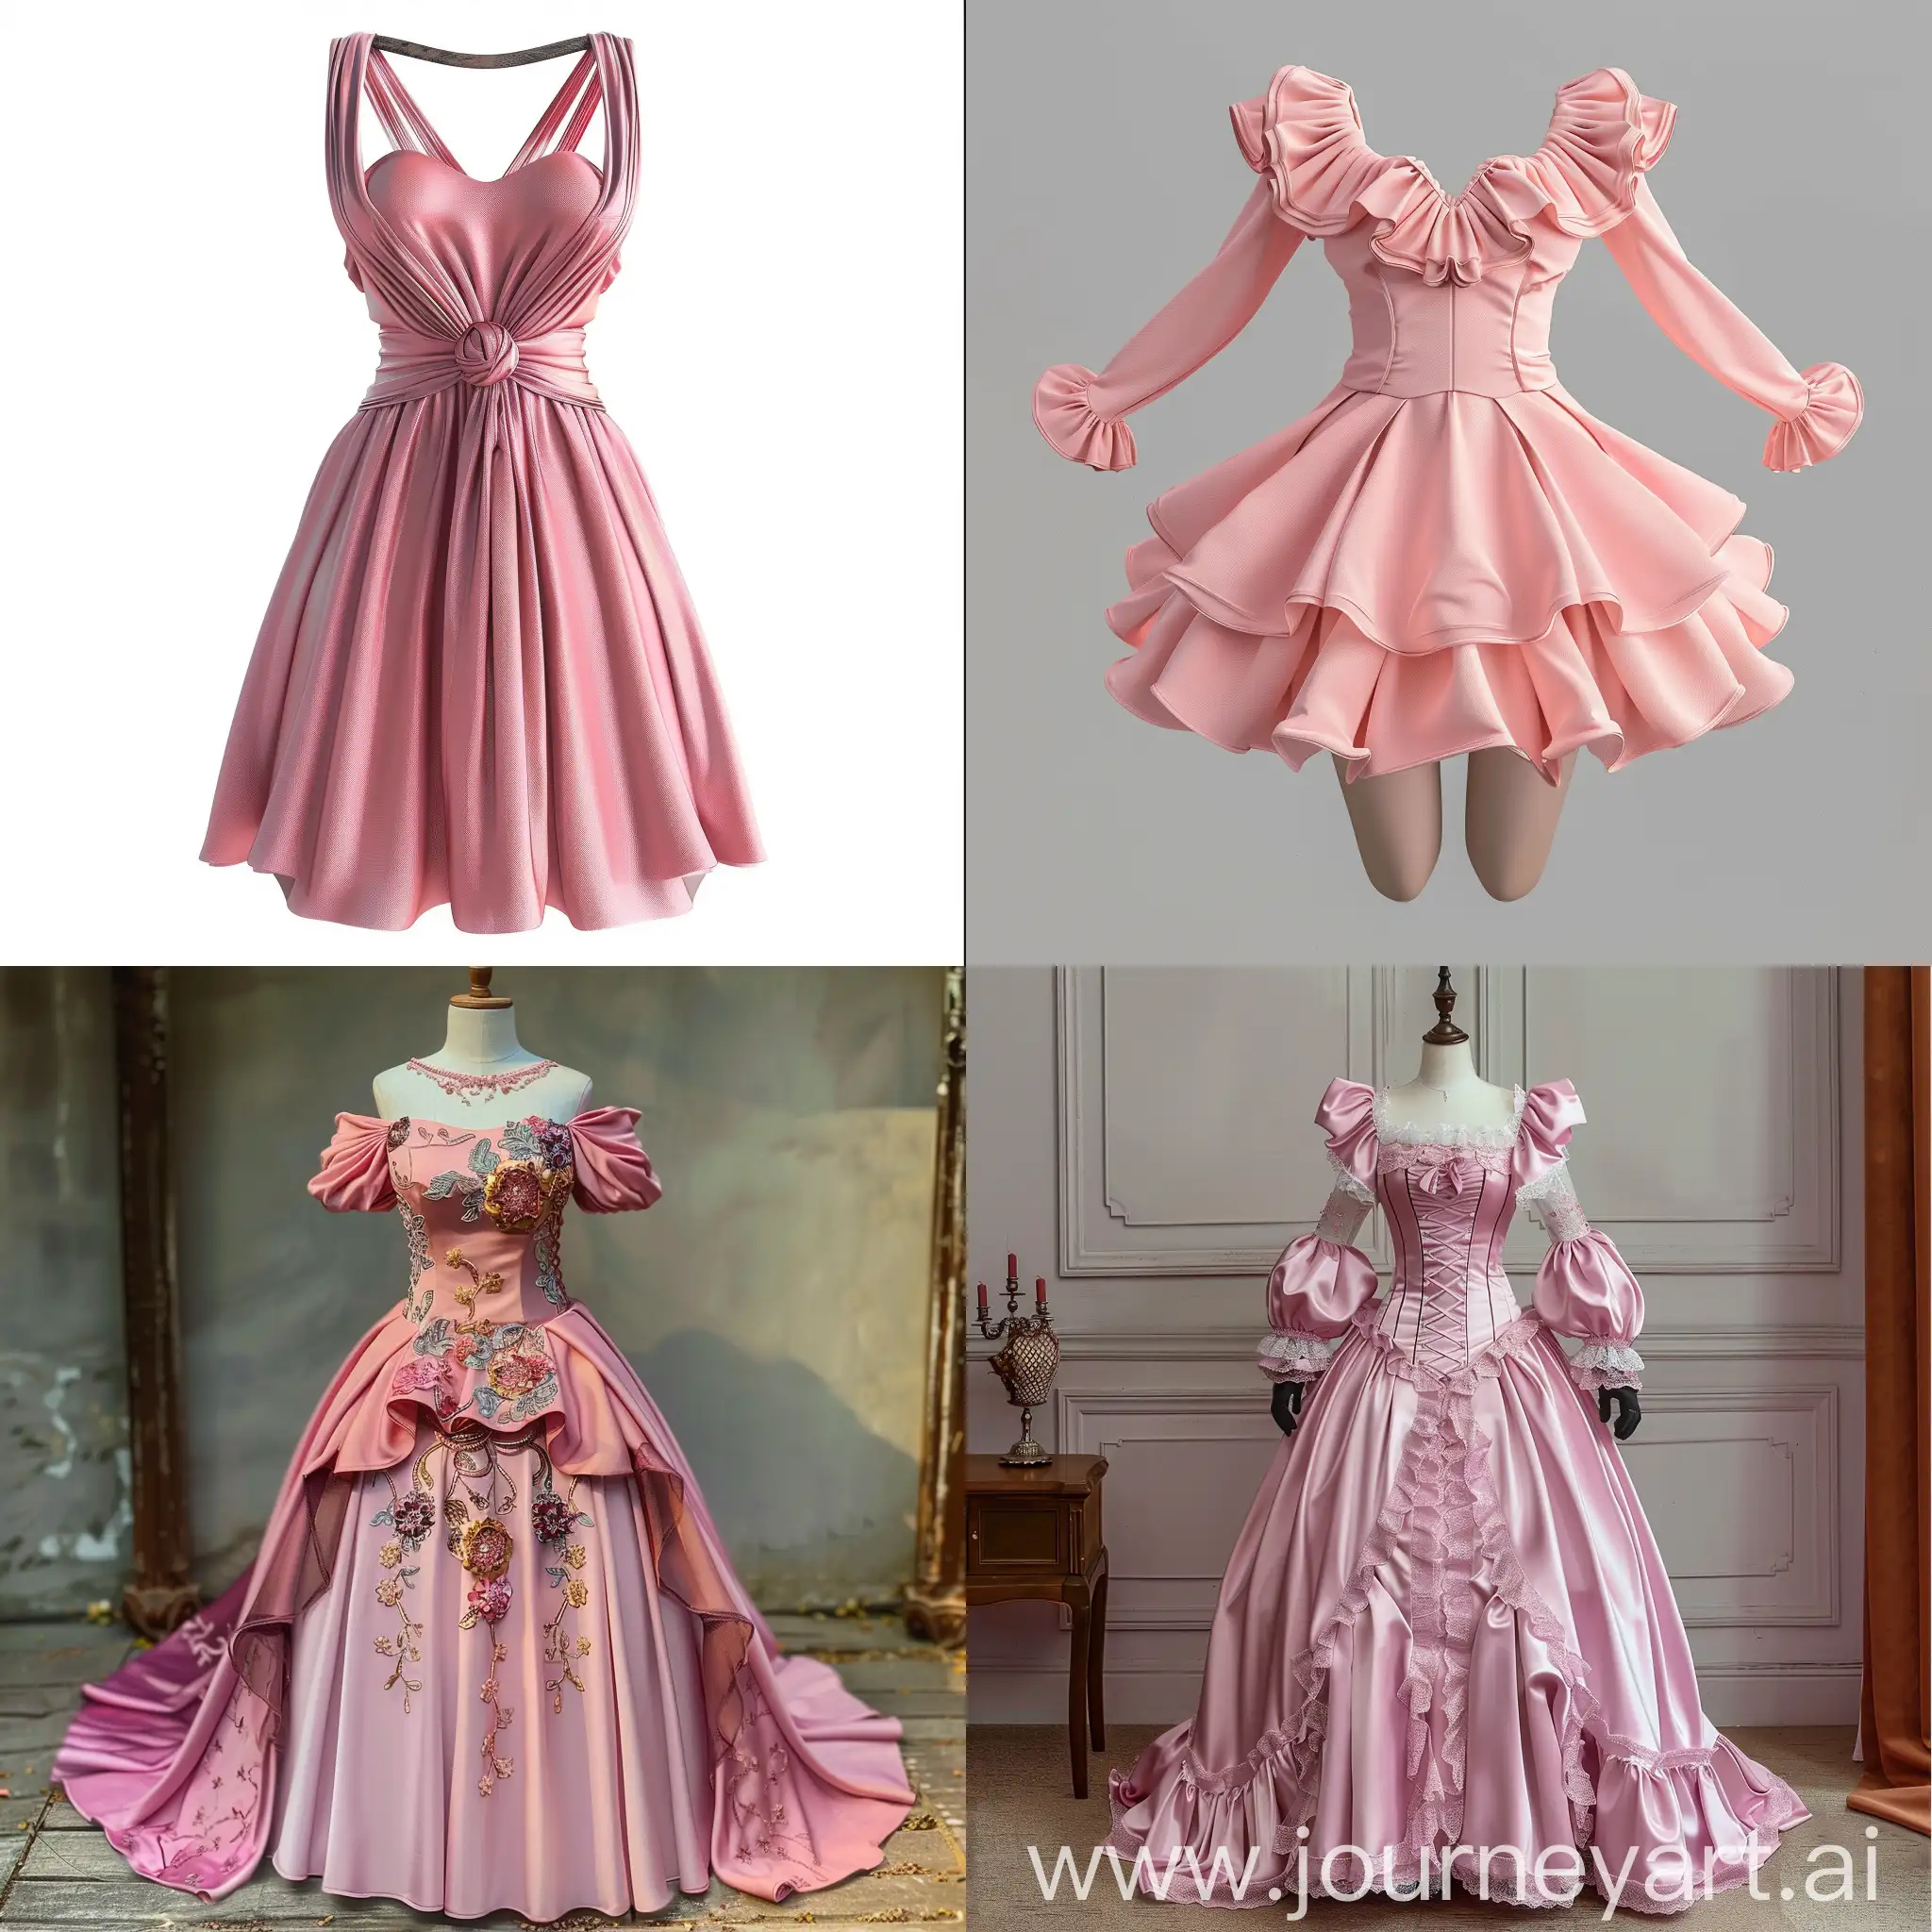 Female adult selphie dress Pink realistic
